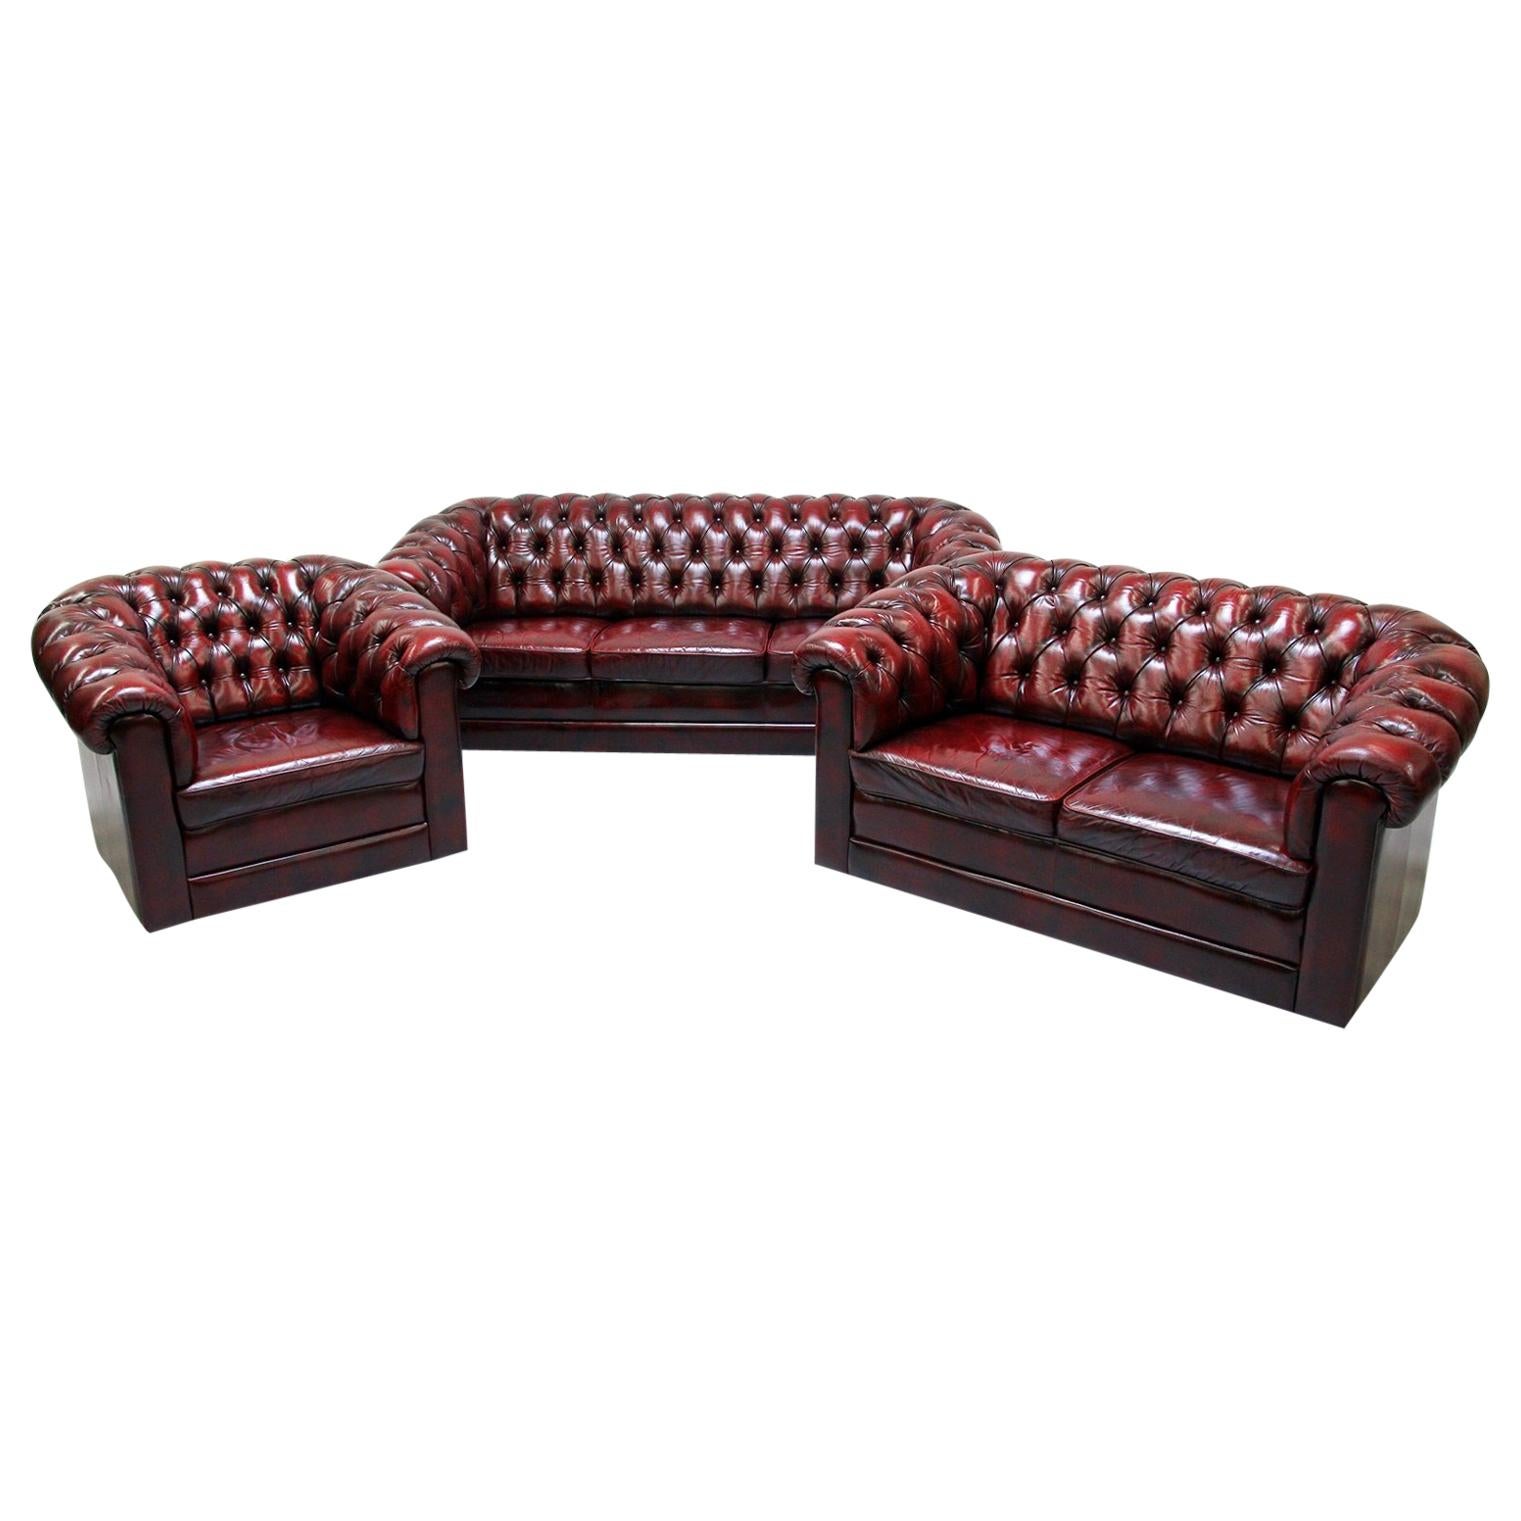 Chesterfield Sofa Set Armchair Genuine Leather Couch Antique Oxblood For Sale